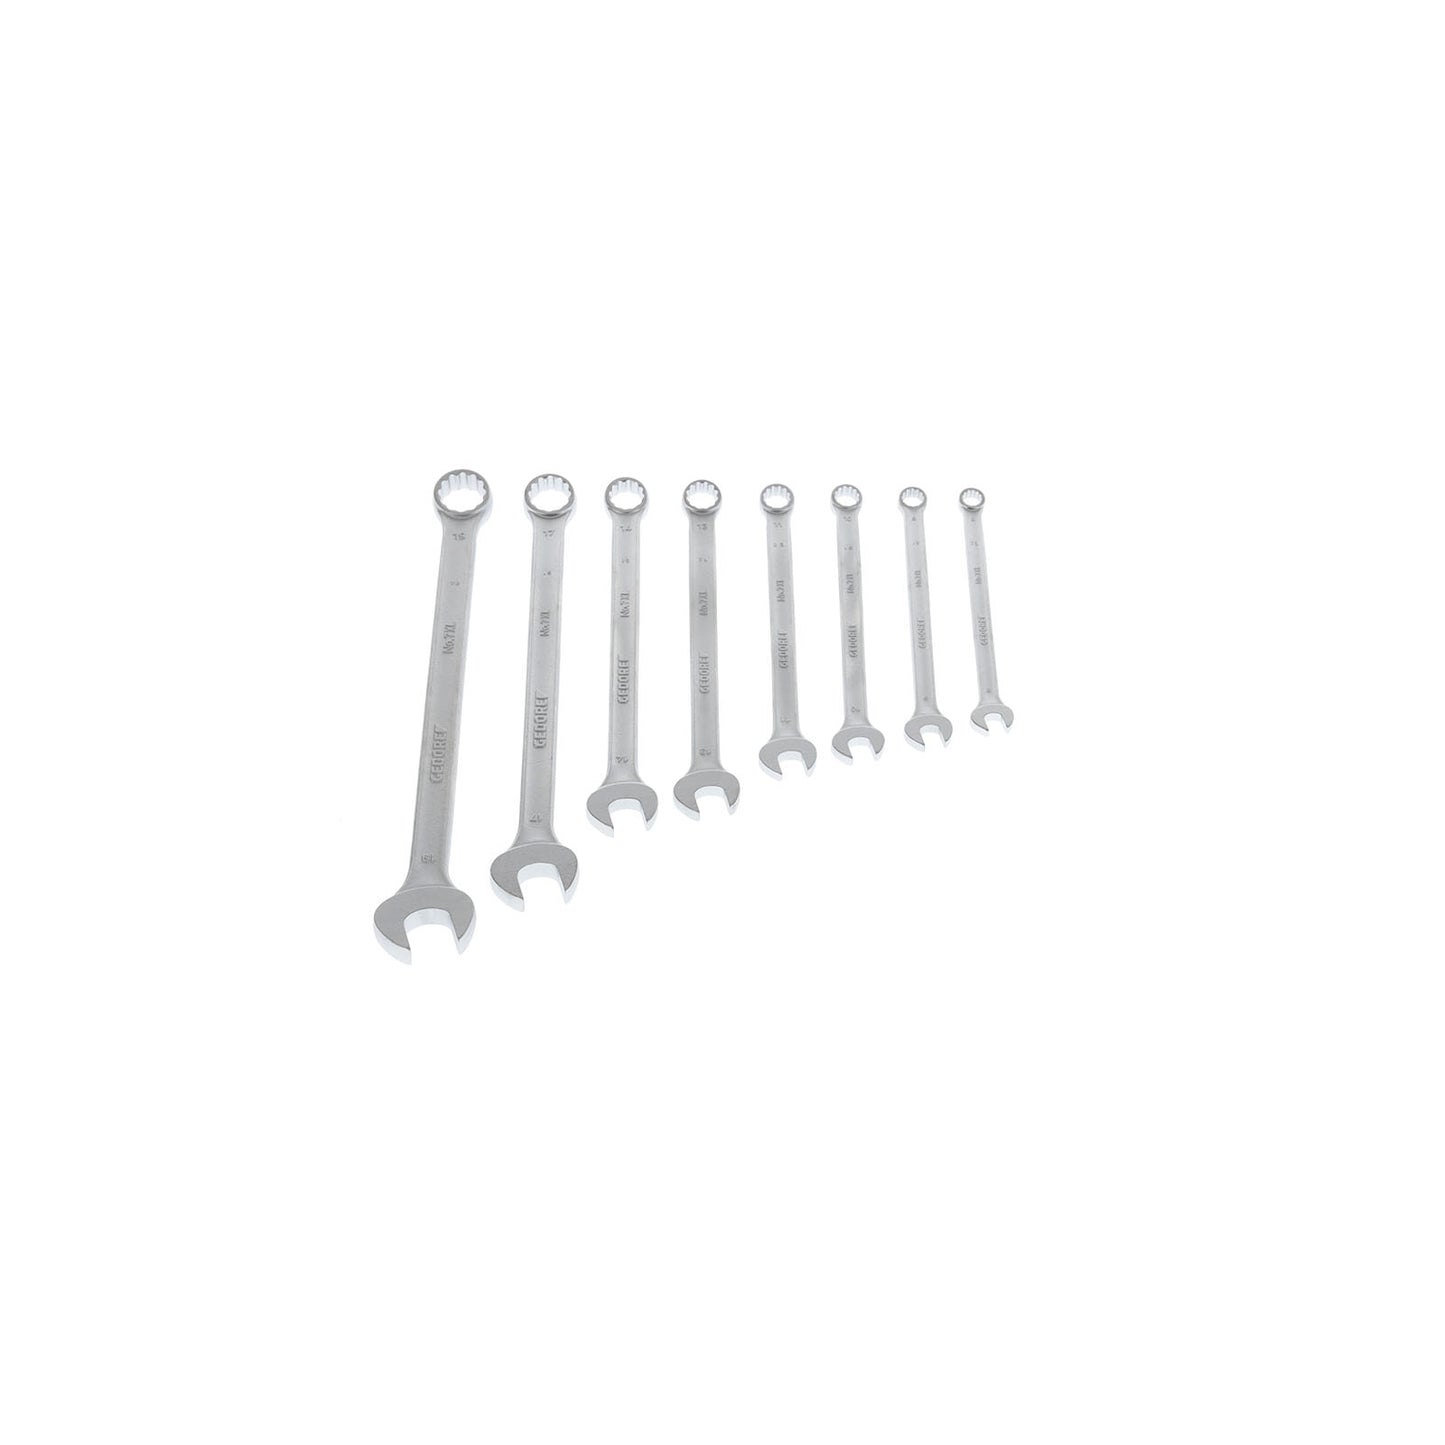 GEDORE 7 XL-080 - Set of 8 XL Combination Wrenches (6104880)